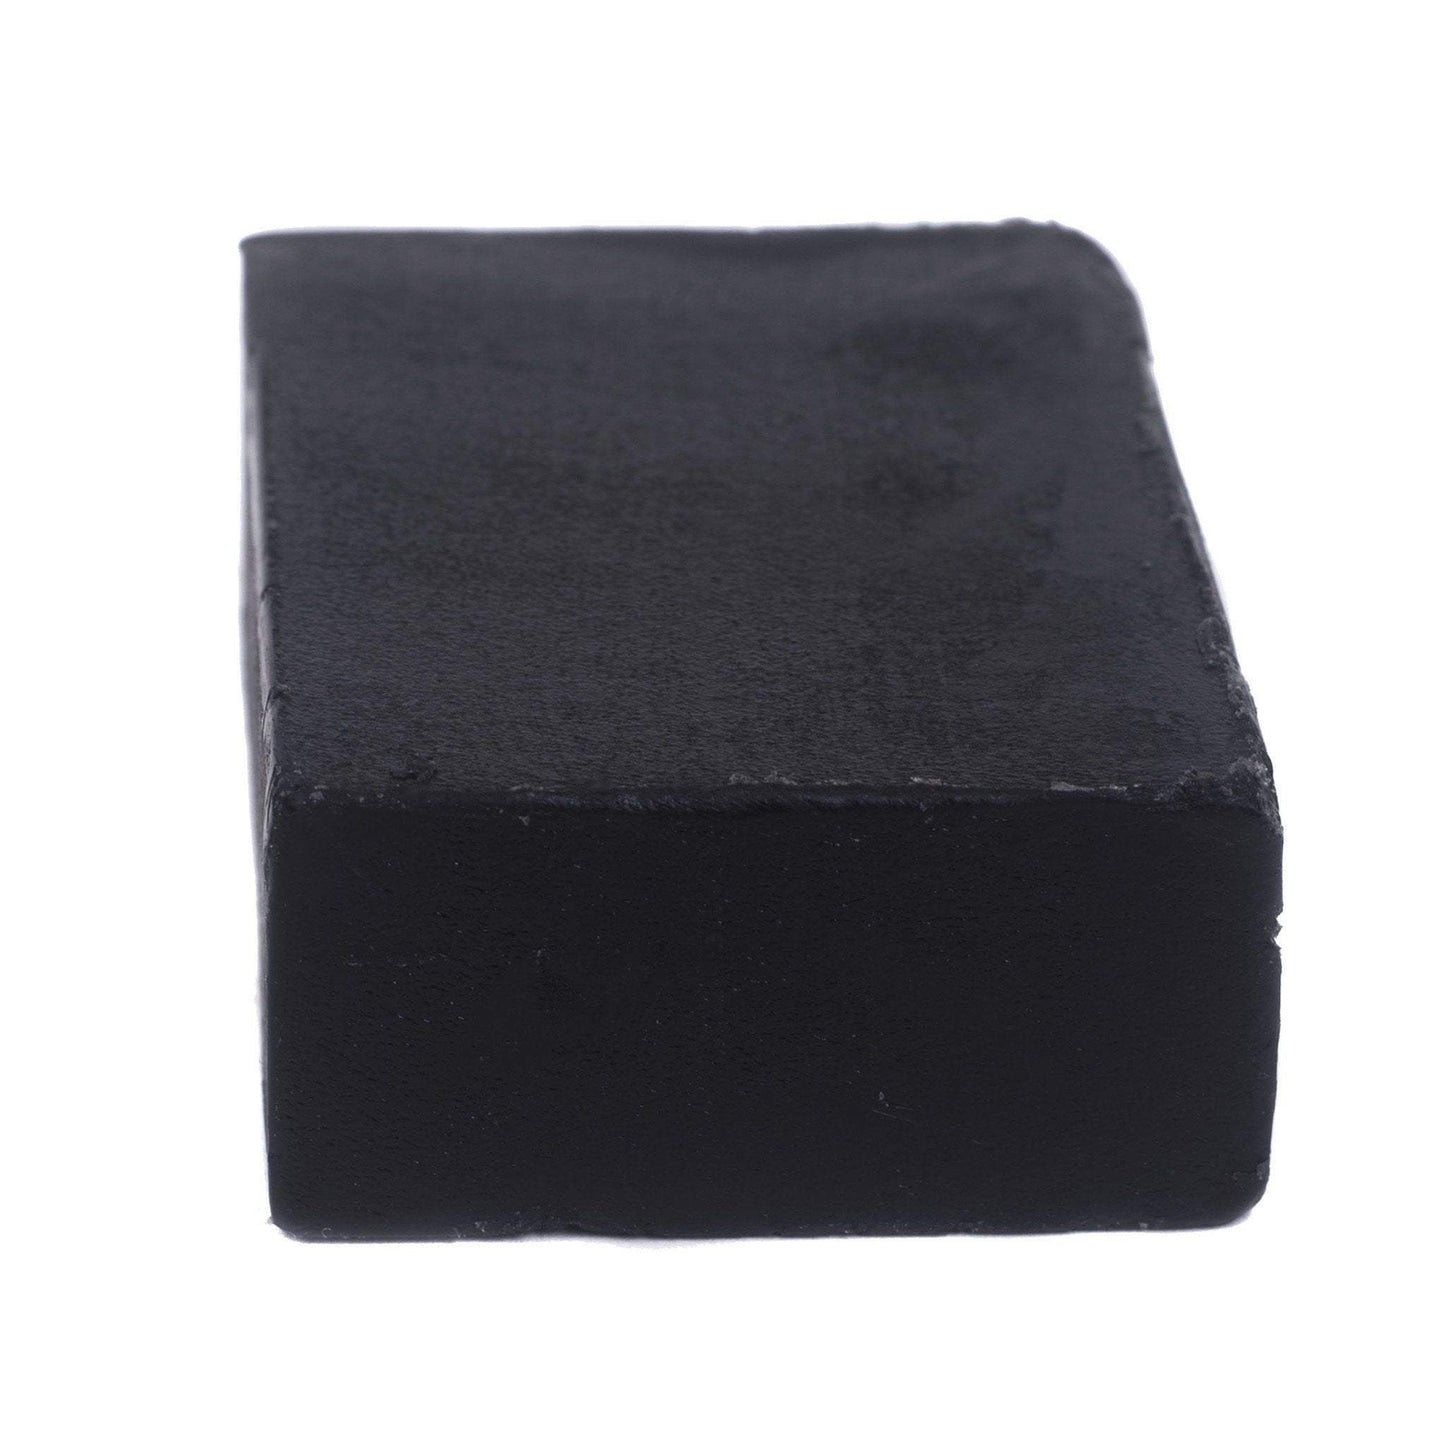 Activated Charcoal Soap - Brahma Bull - Men's Grooming